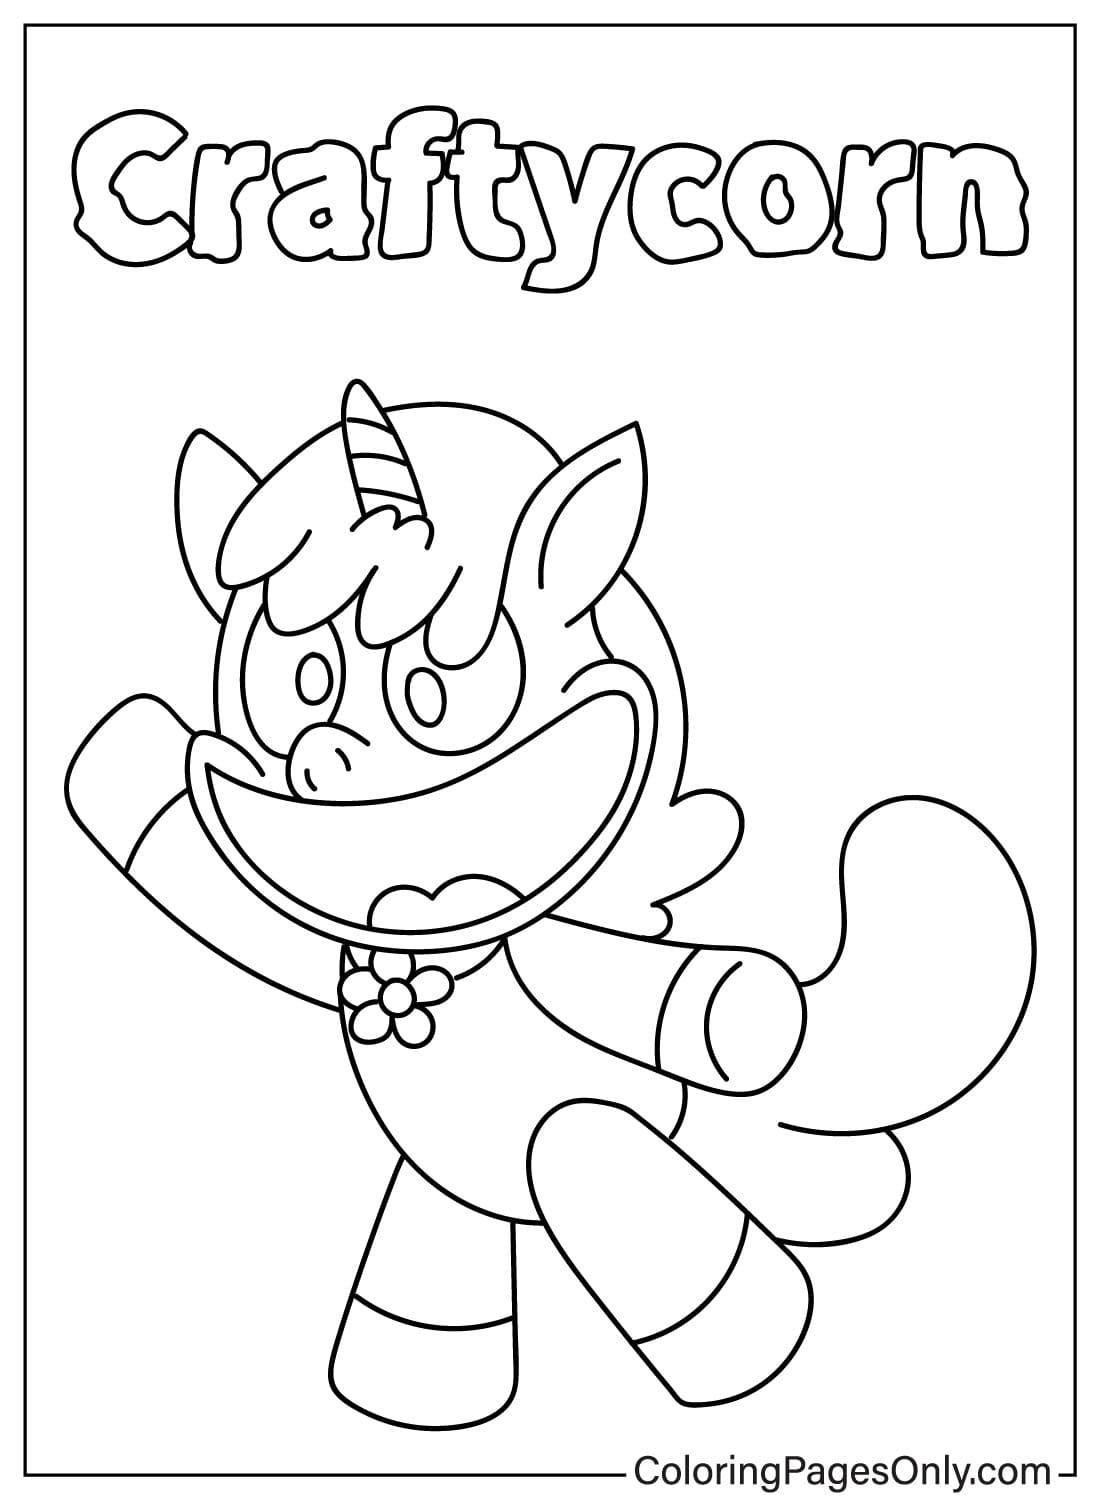 Images CraftyCorn Coloring Page from CraftyCorn